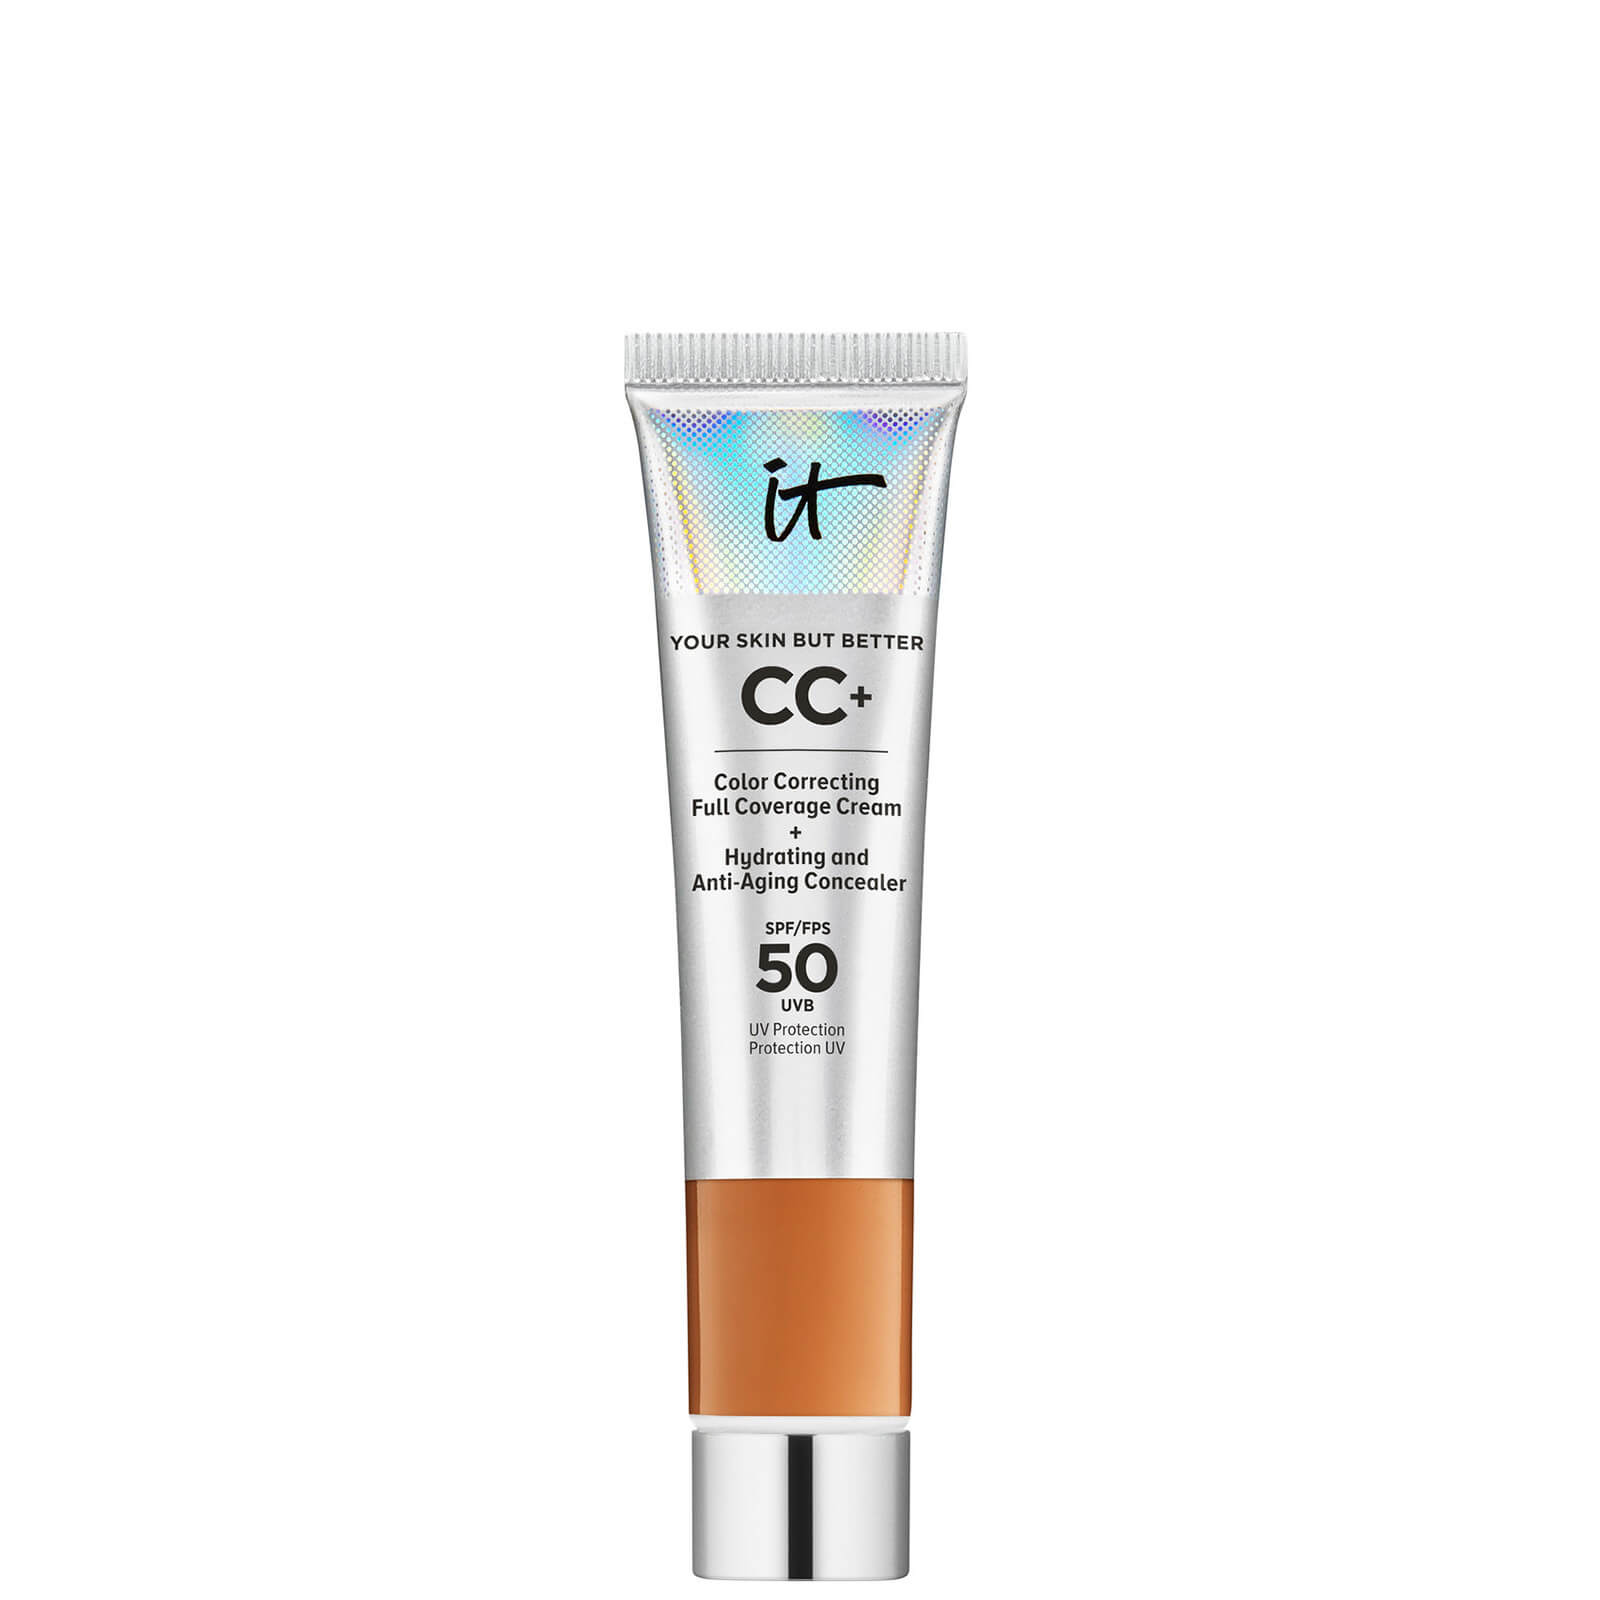 IT Cosmetics Your Skin But Better CC+ Cream with SPF50 12ml (Various Shades) - Rich